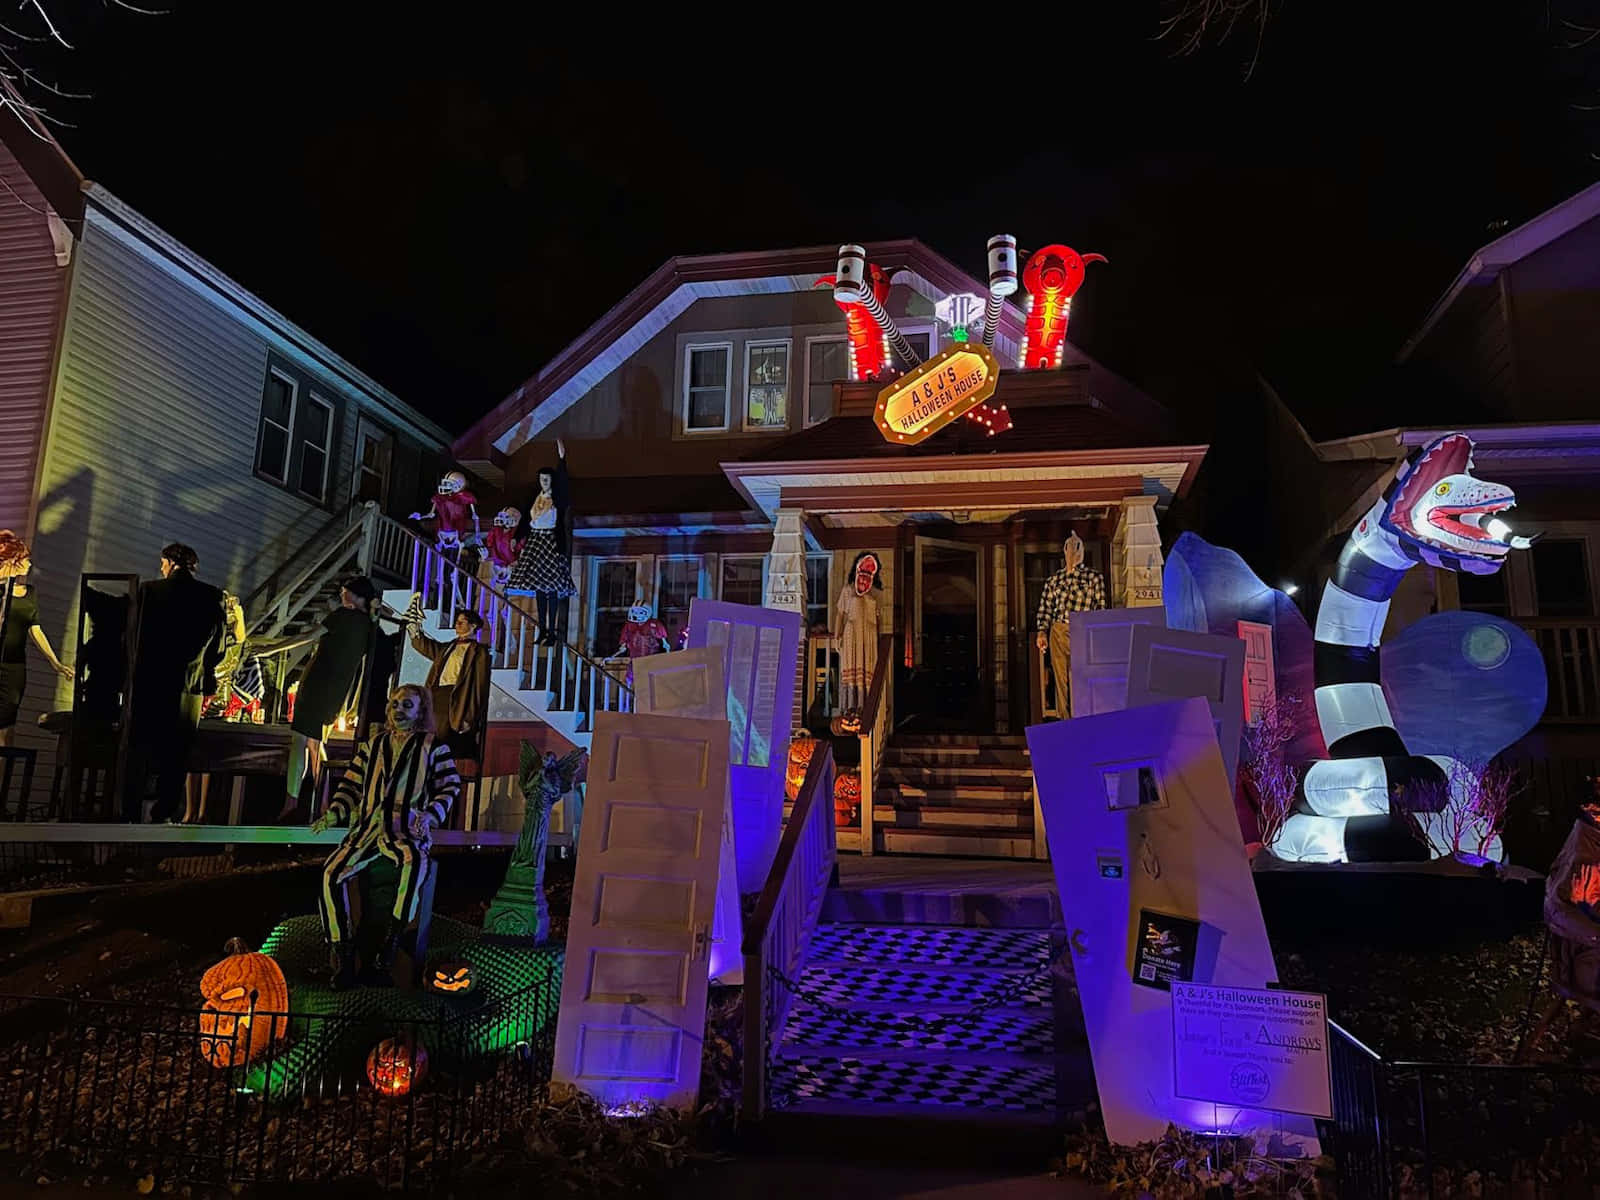 Give your front yard a spooky makeover for Halloween with these fun and festive decorations! Wallpaper